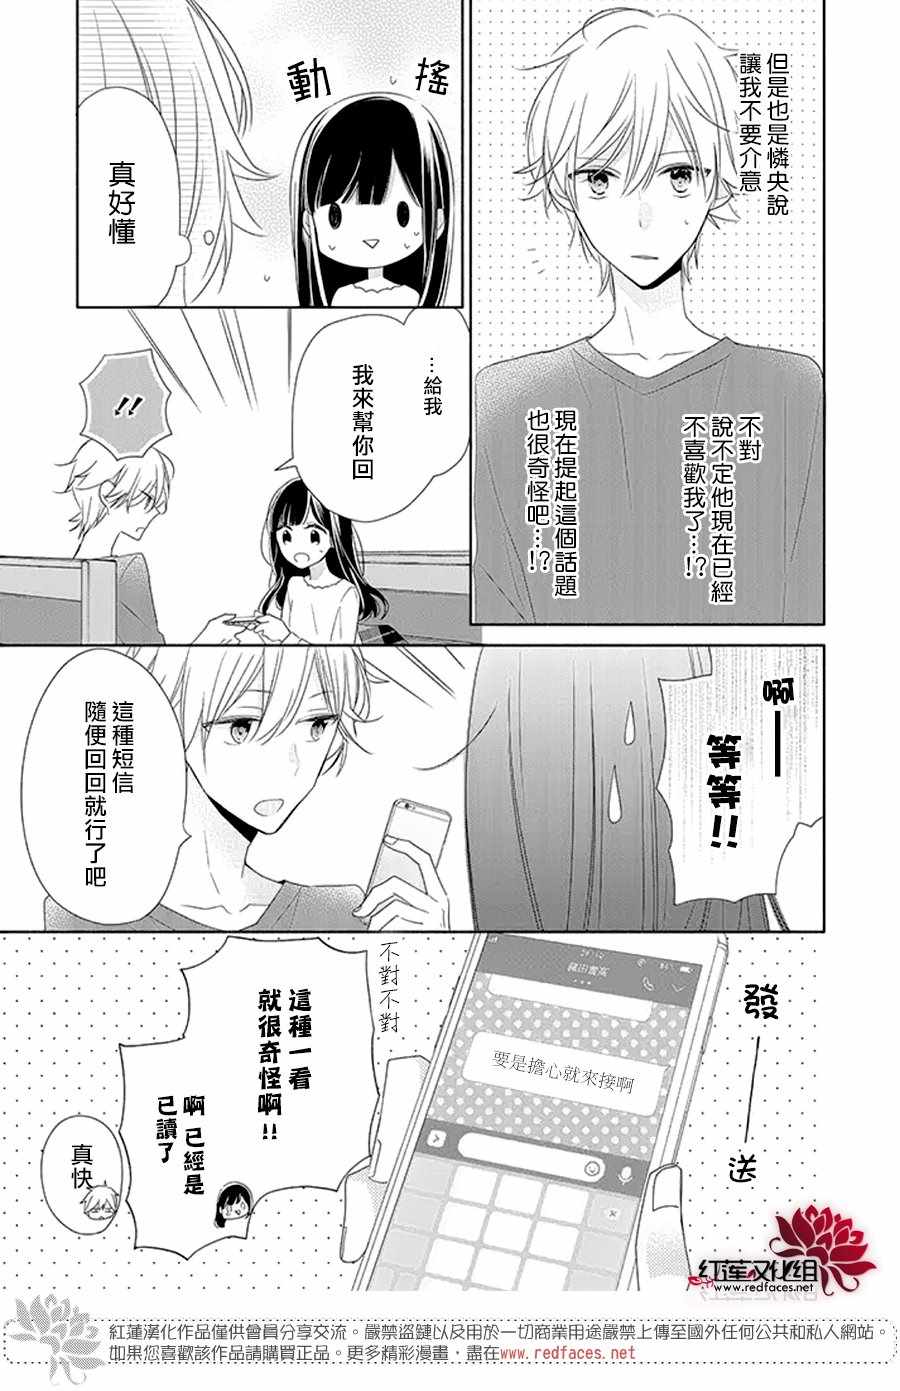 《If given a second chance》漫画 second chance 020集